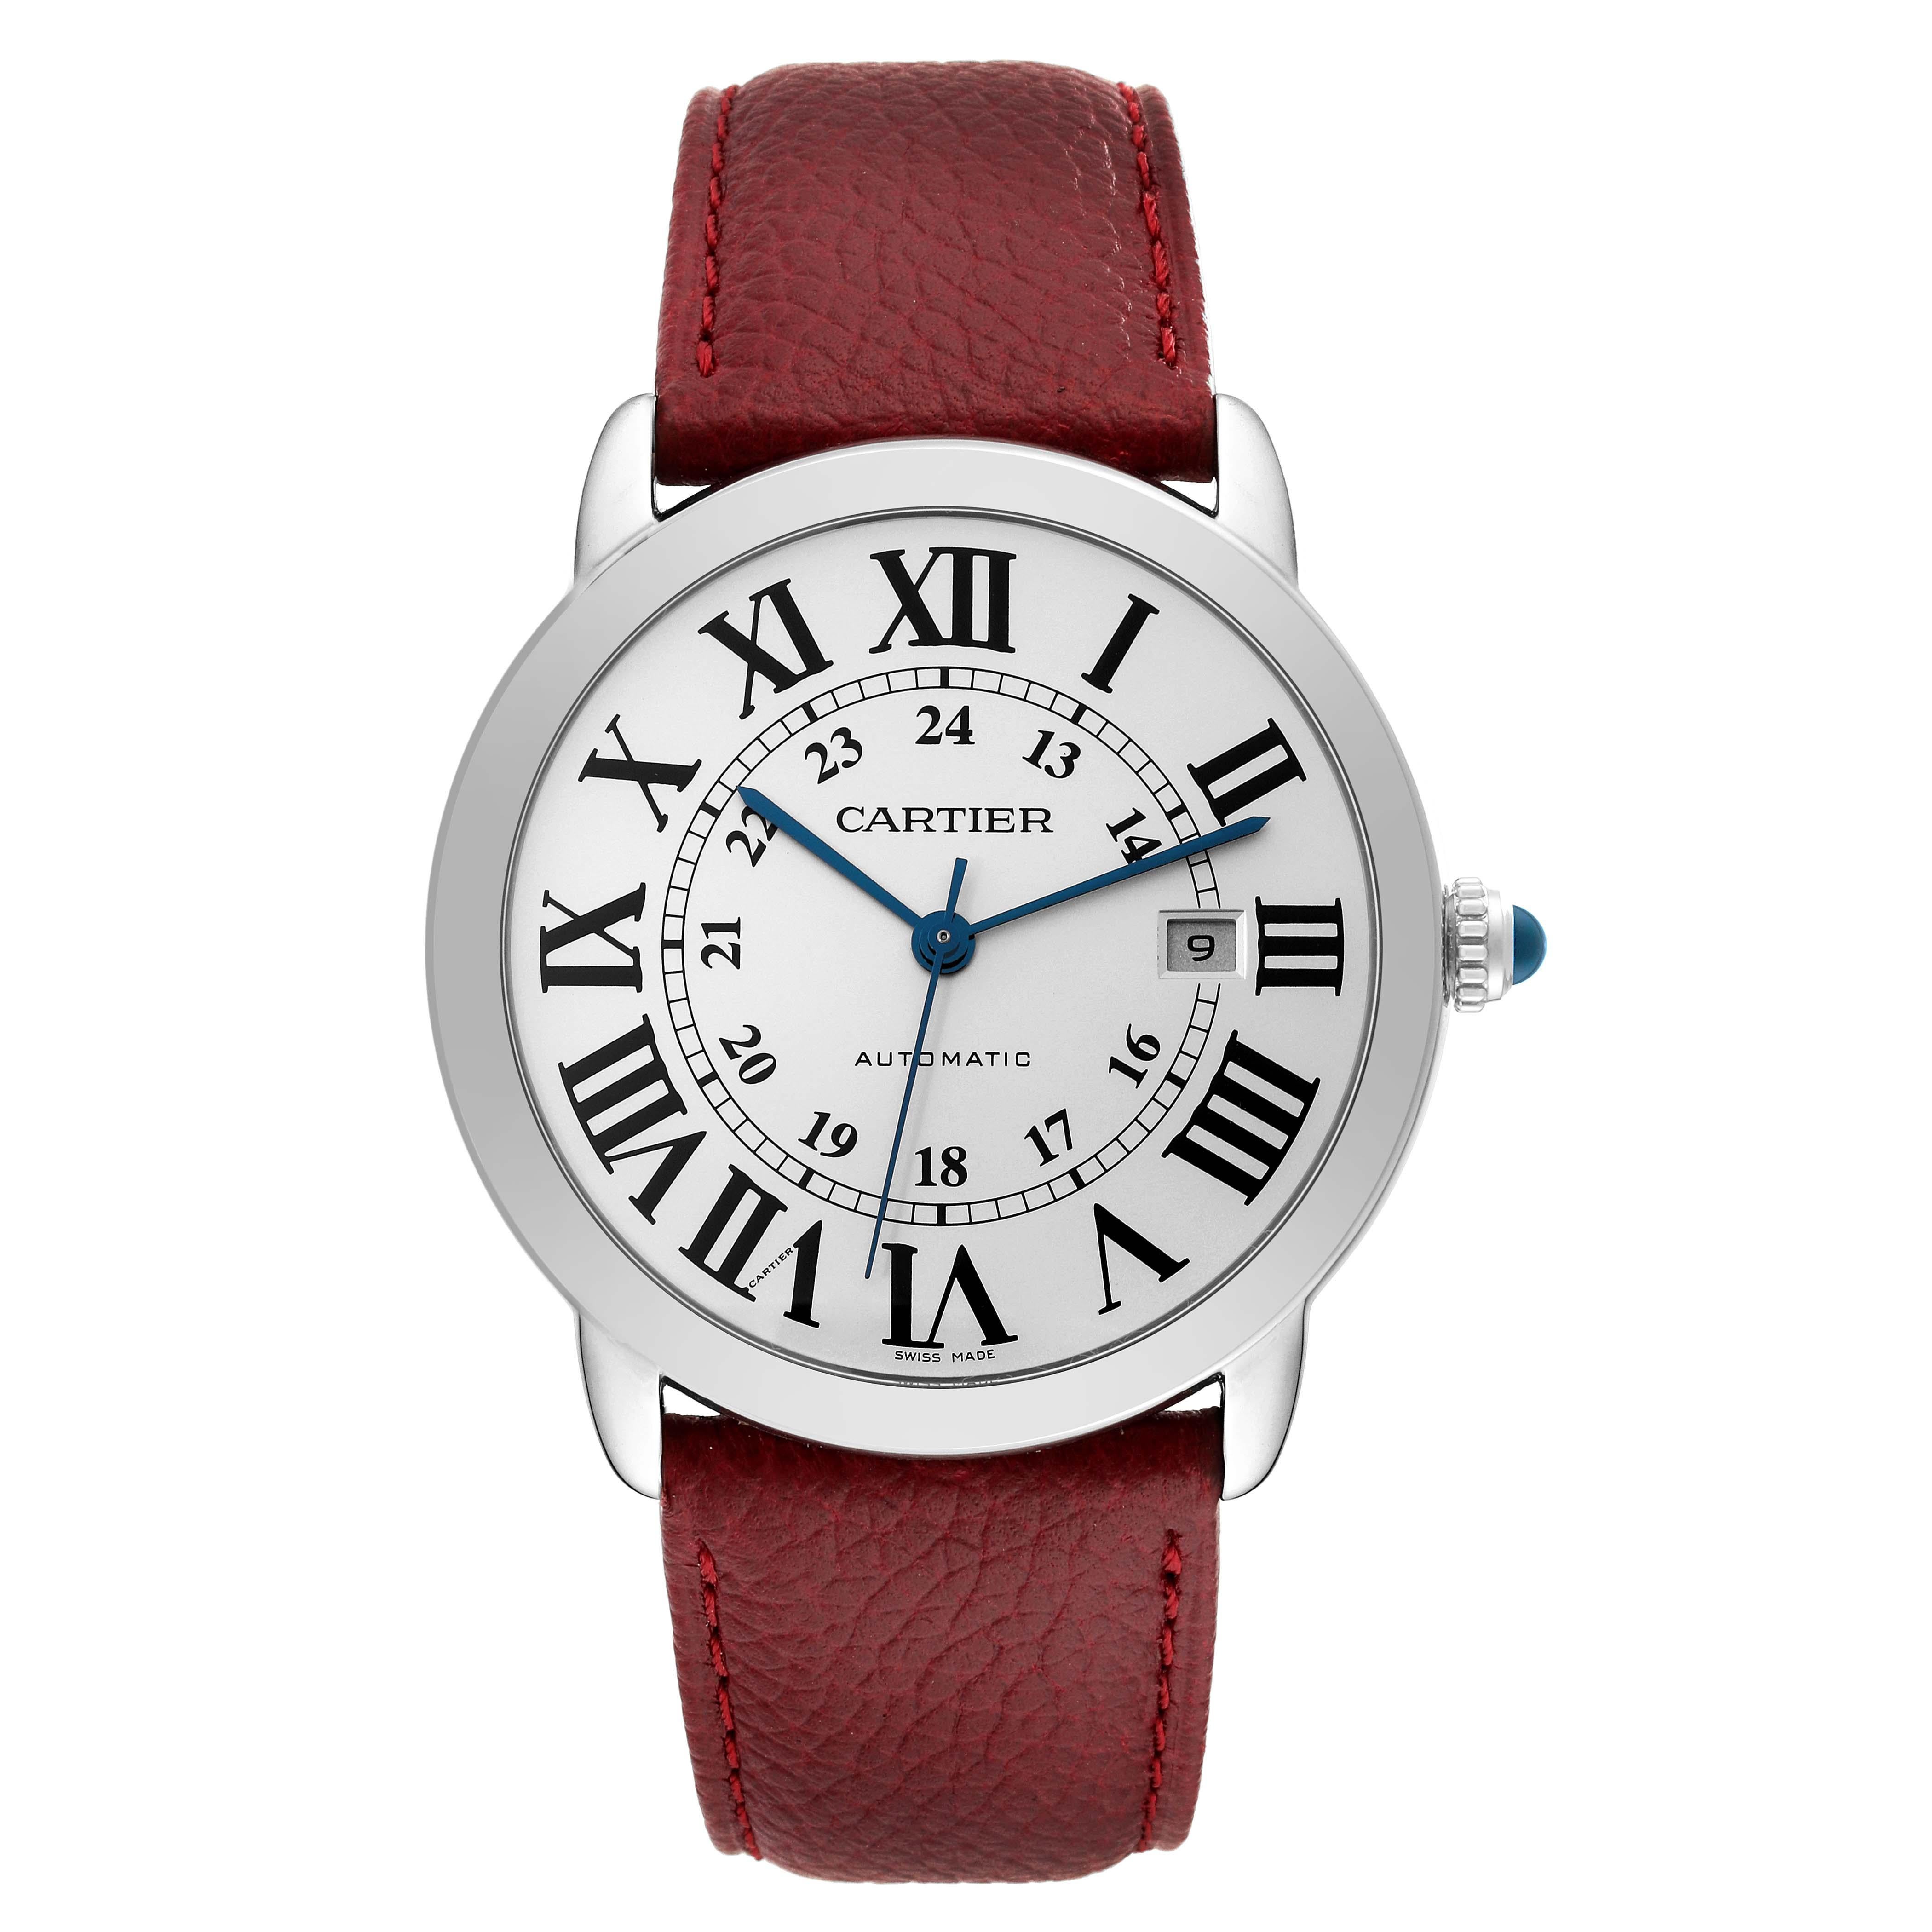 Cartier Ronde Solo XL Silver Dial Steel Mens Watch W6701010 Box Papers. Automatic self-winding movement. Stainless steel case 42.0 mm in diameter. Circular grained crown set with the blue spinel cabochon. . Scratch resistant sapphire crystal.